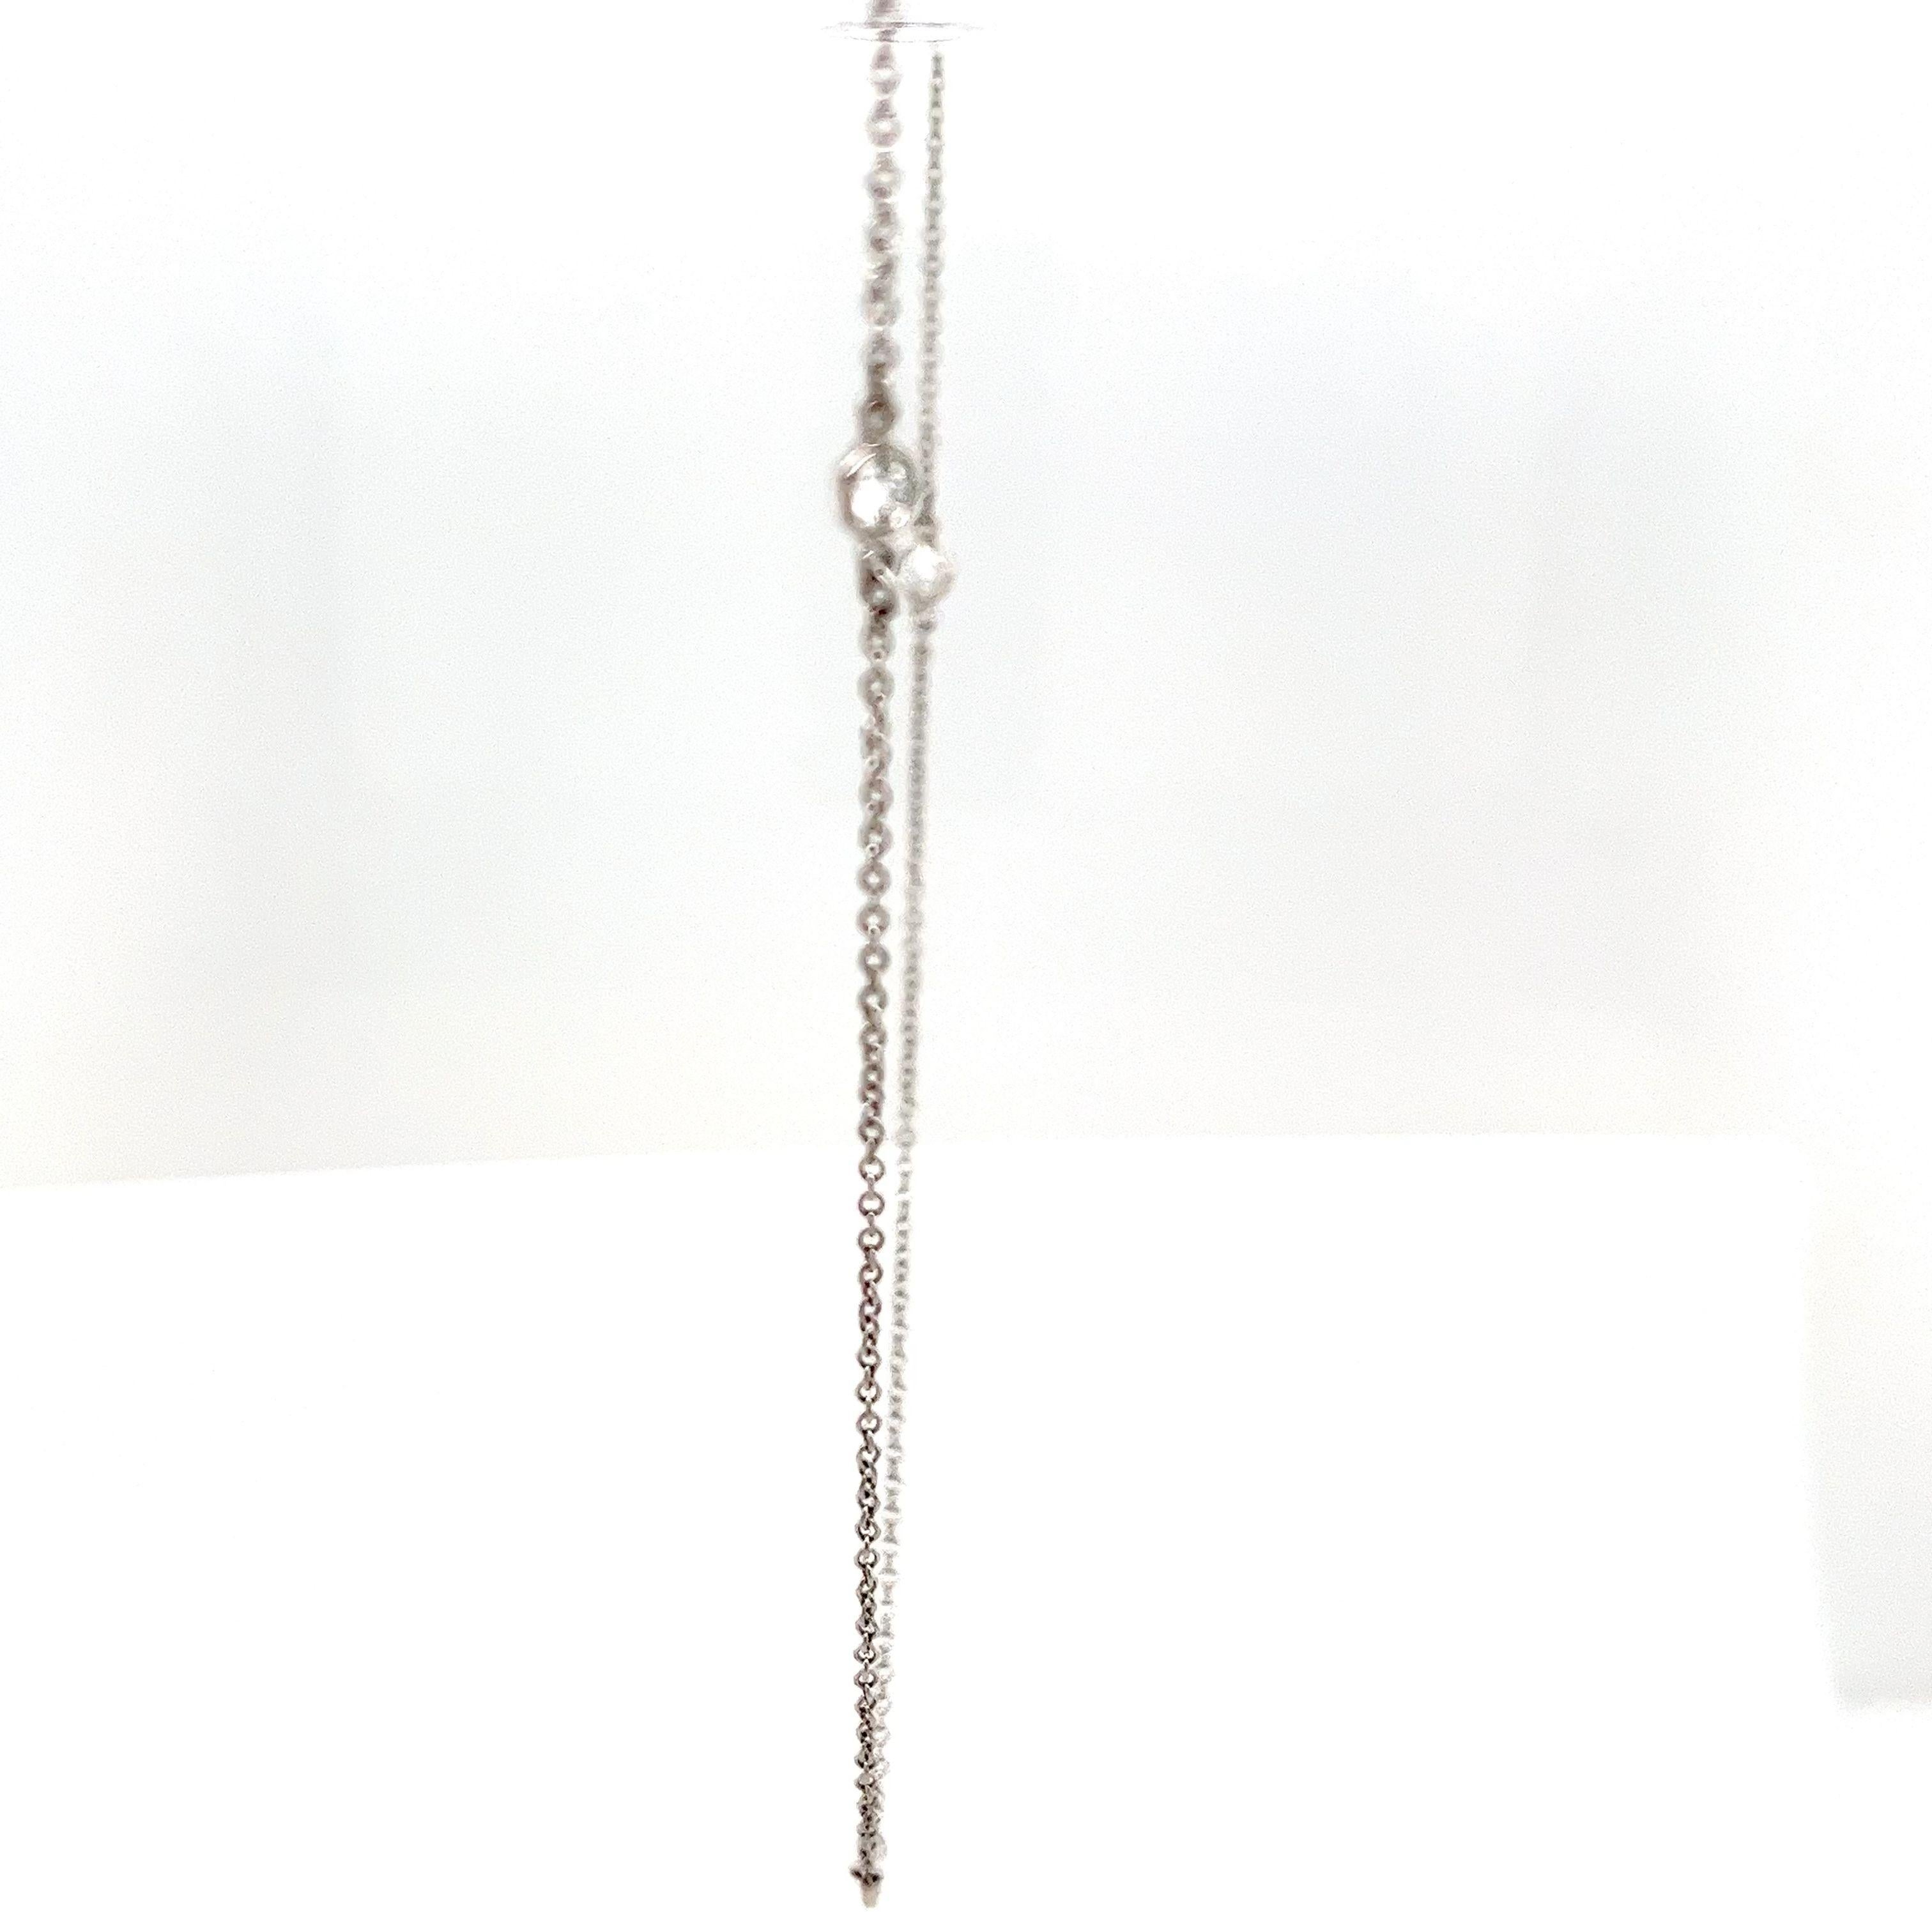 The Tiffany & Co. Diamond by the Yard necklace is a classic piece! With 5 diamonds totaling 0.30 carats, it's elegant and versatile.  This necklace features a simple yet sophisticated design with diamonds set at intervals along the chain, allowing